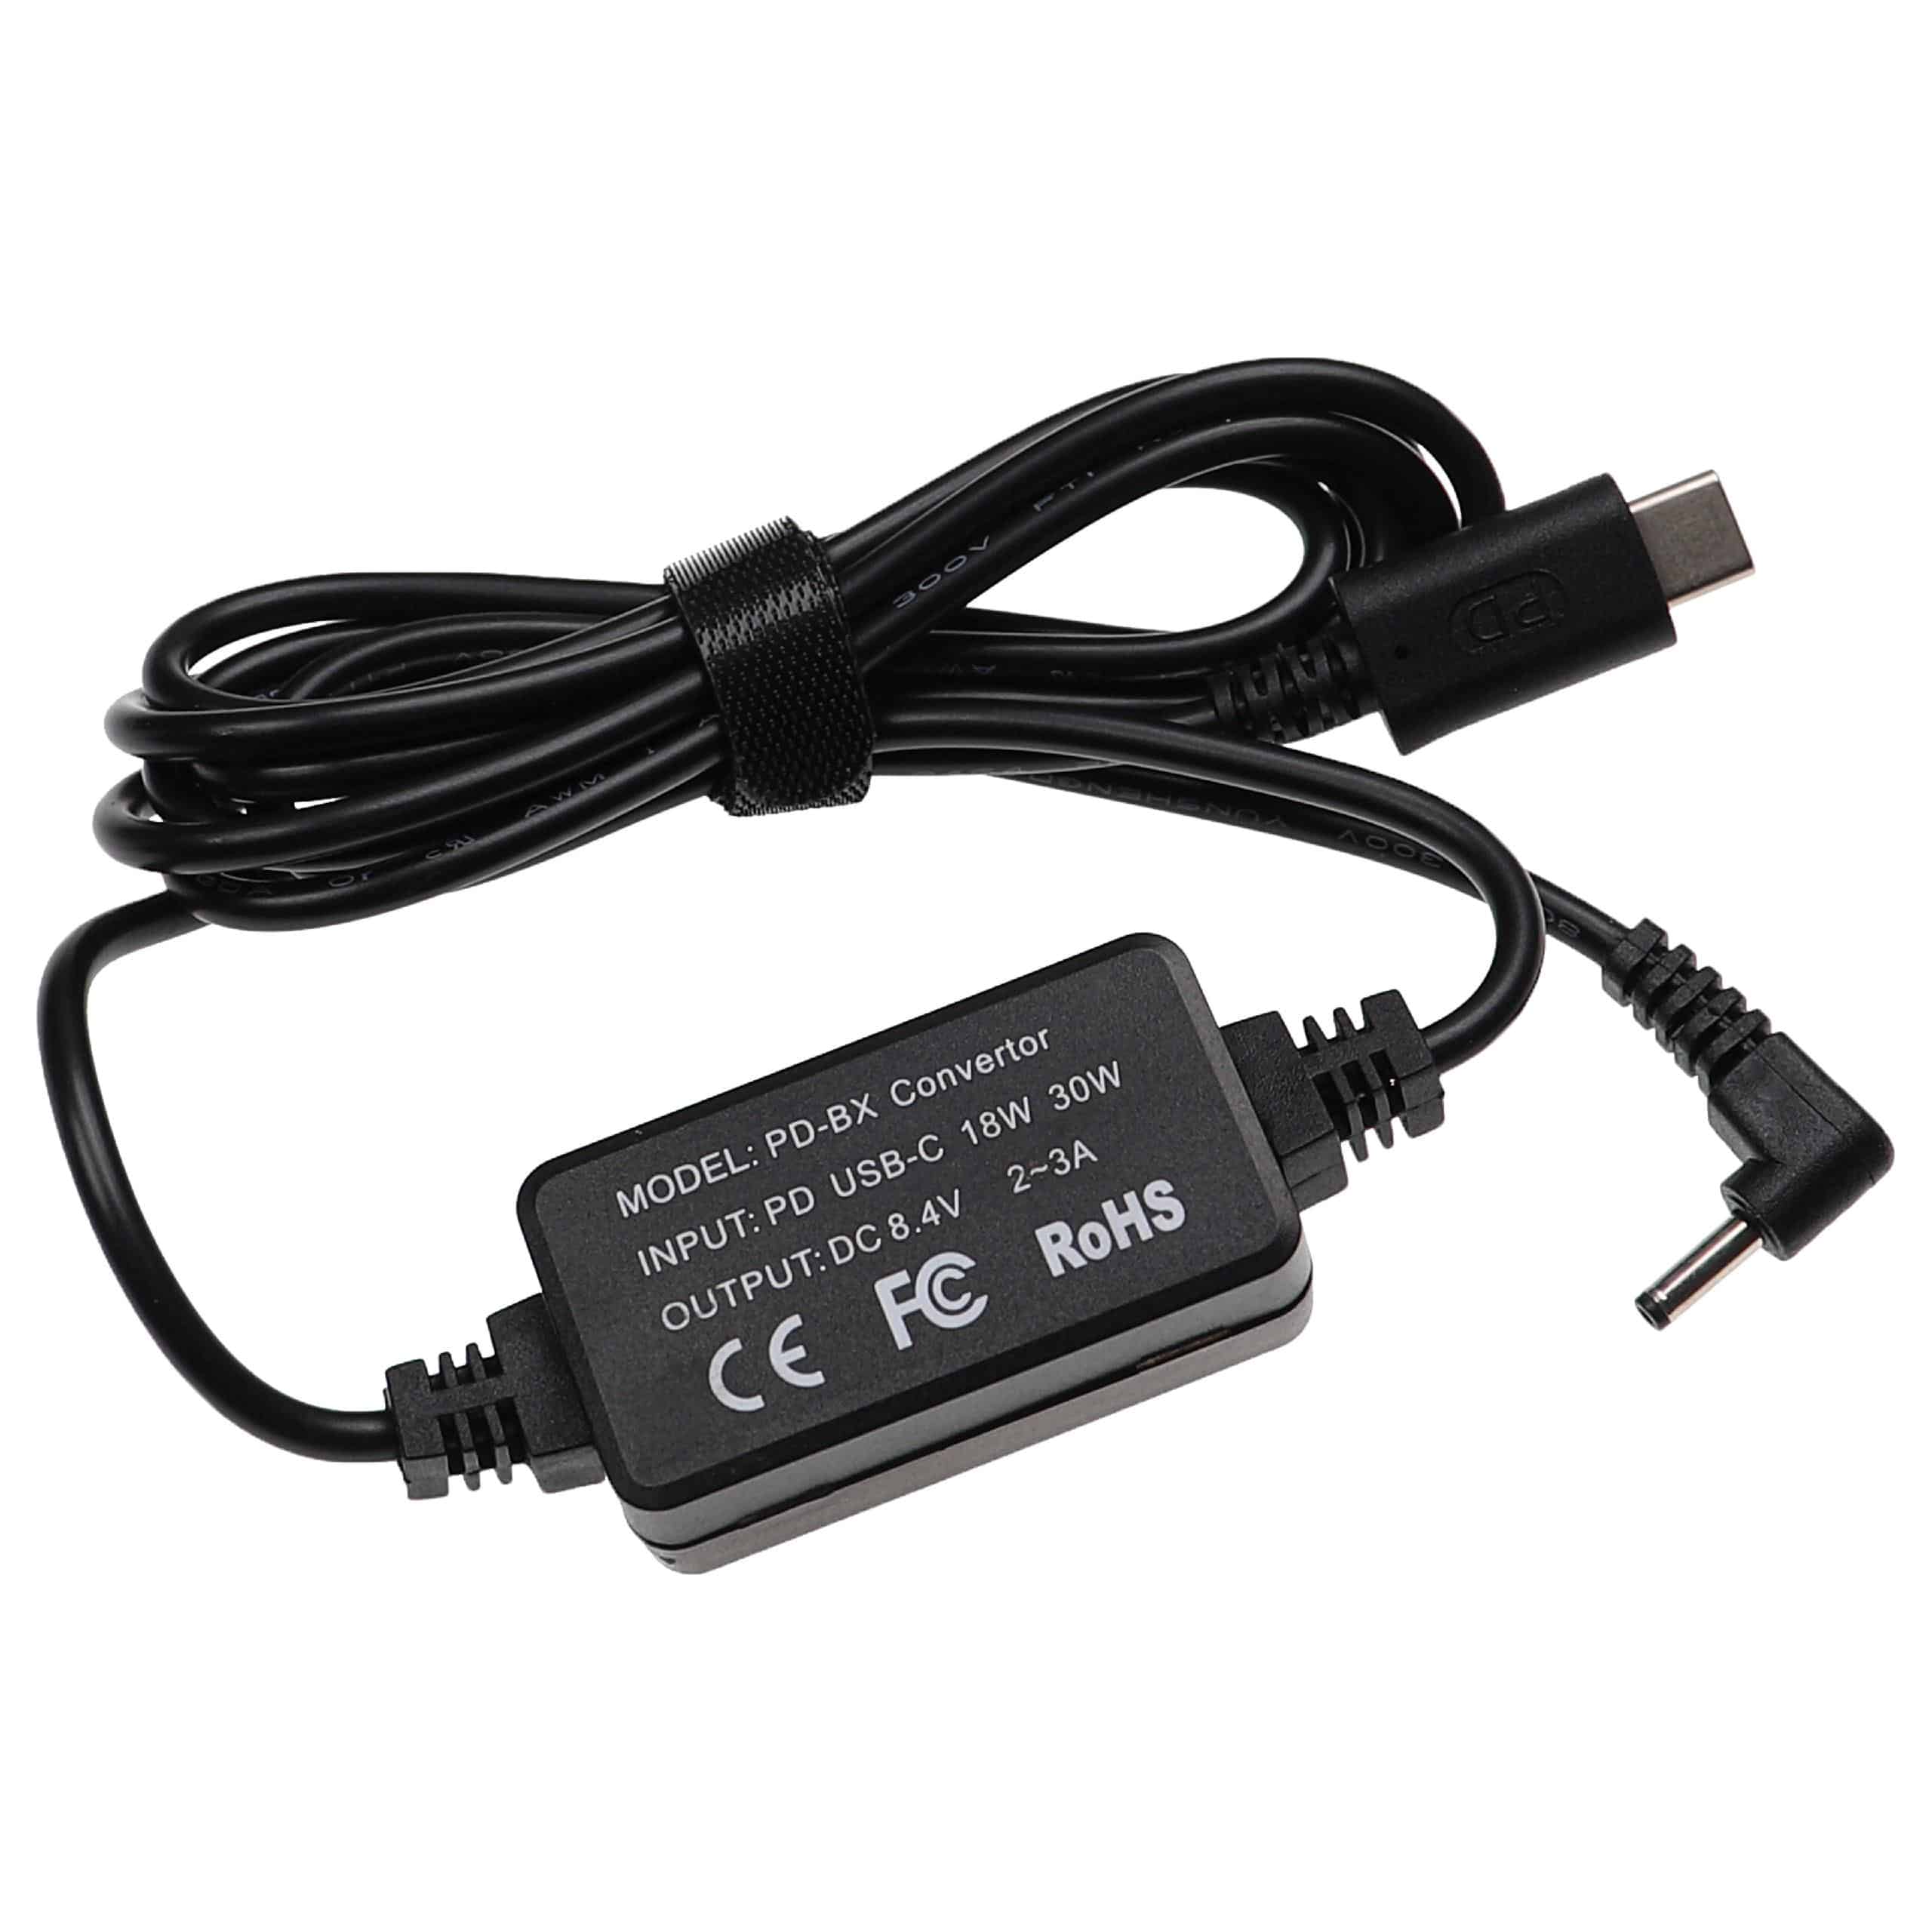 USB Power Supply replaces CA-PS700 for Camera - 1.2 m, 8.4 V 3.0 A